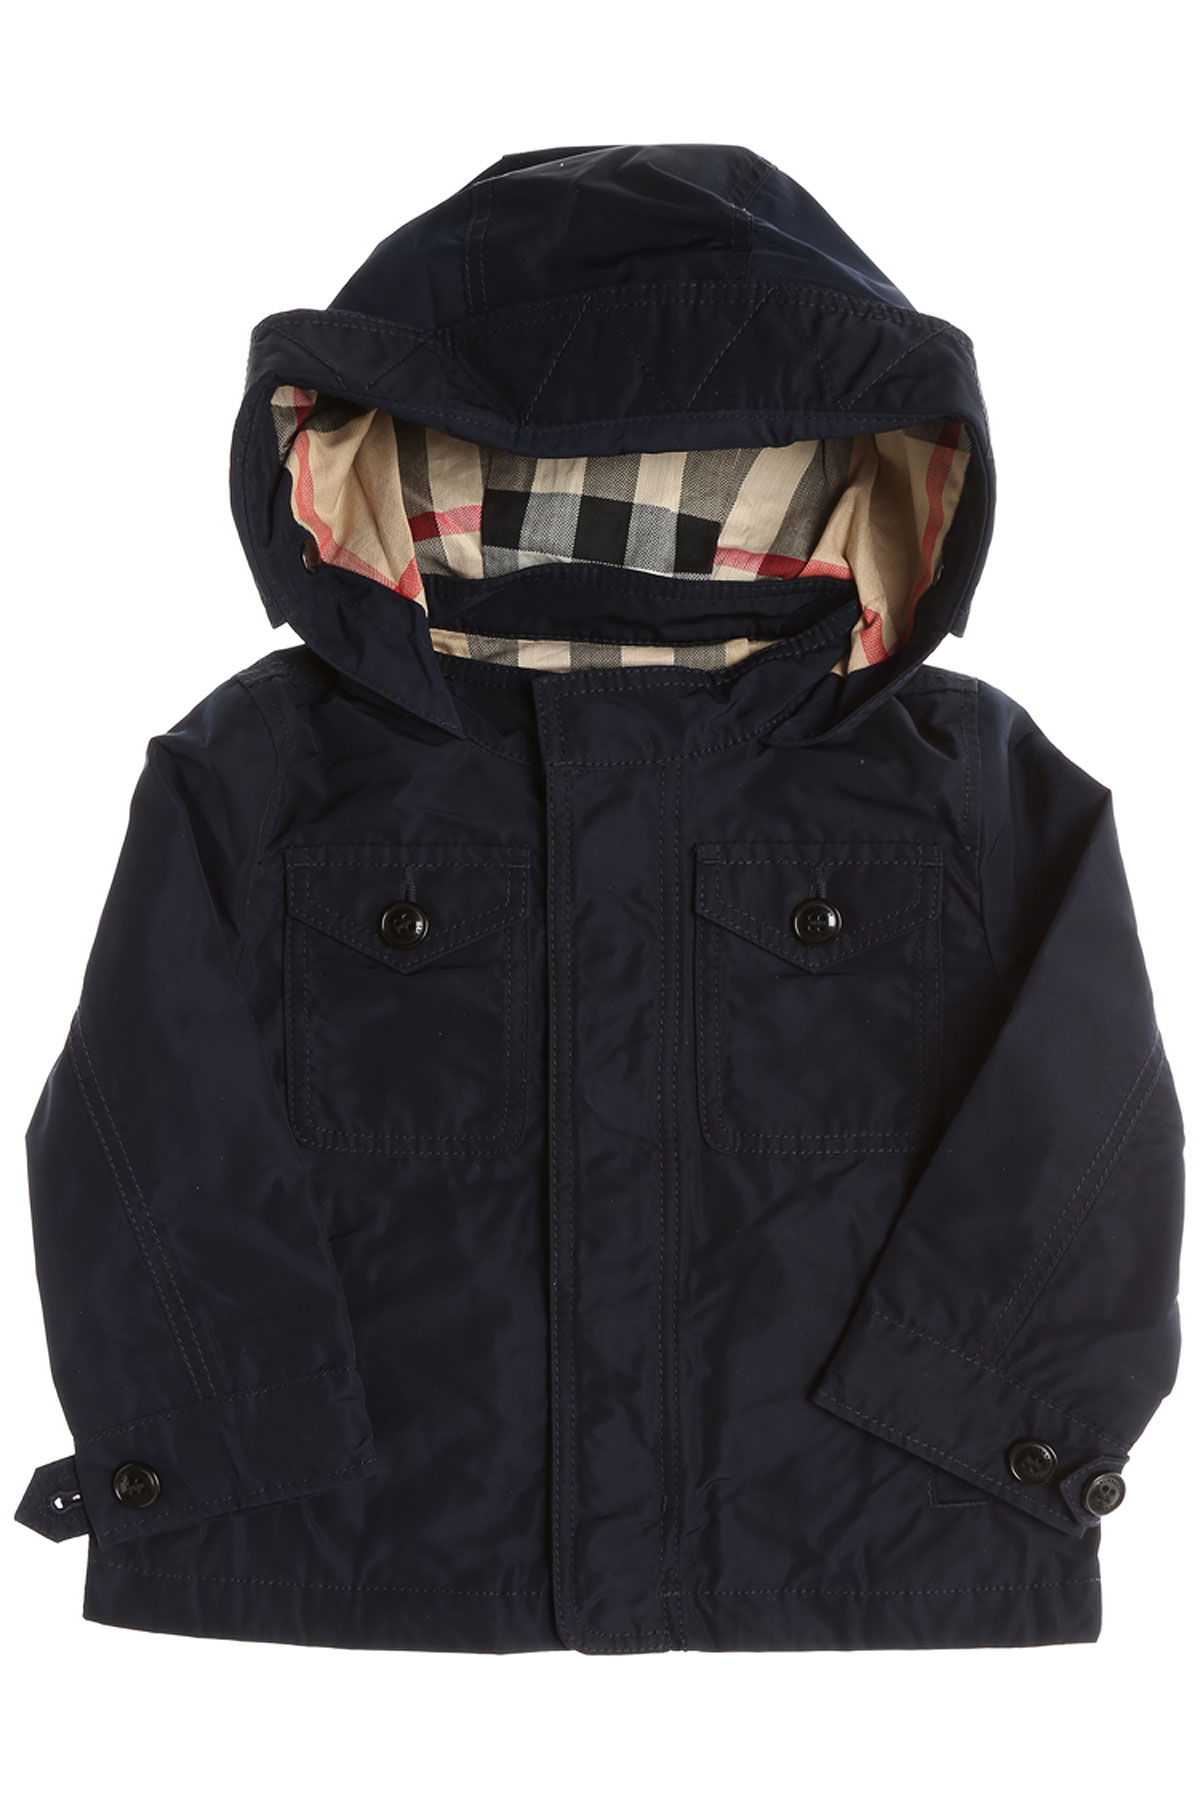 Baby Boy Clothing Burberry, Style code: 4034741-41200-